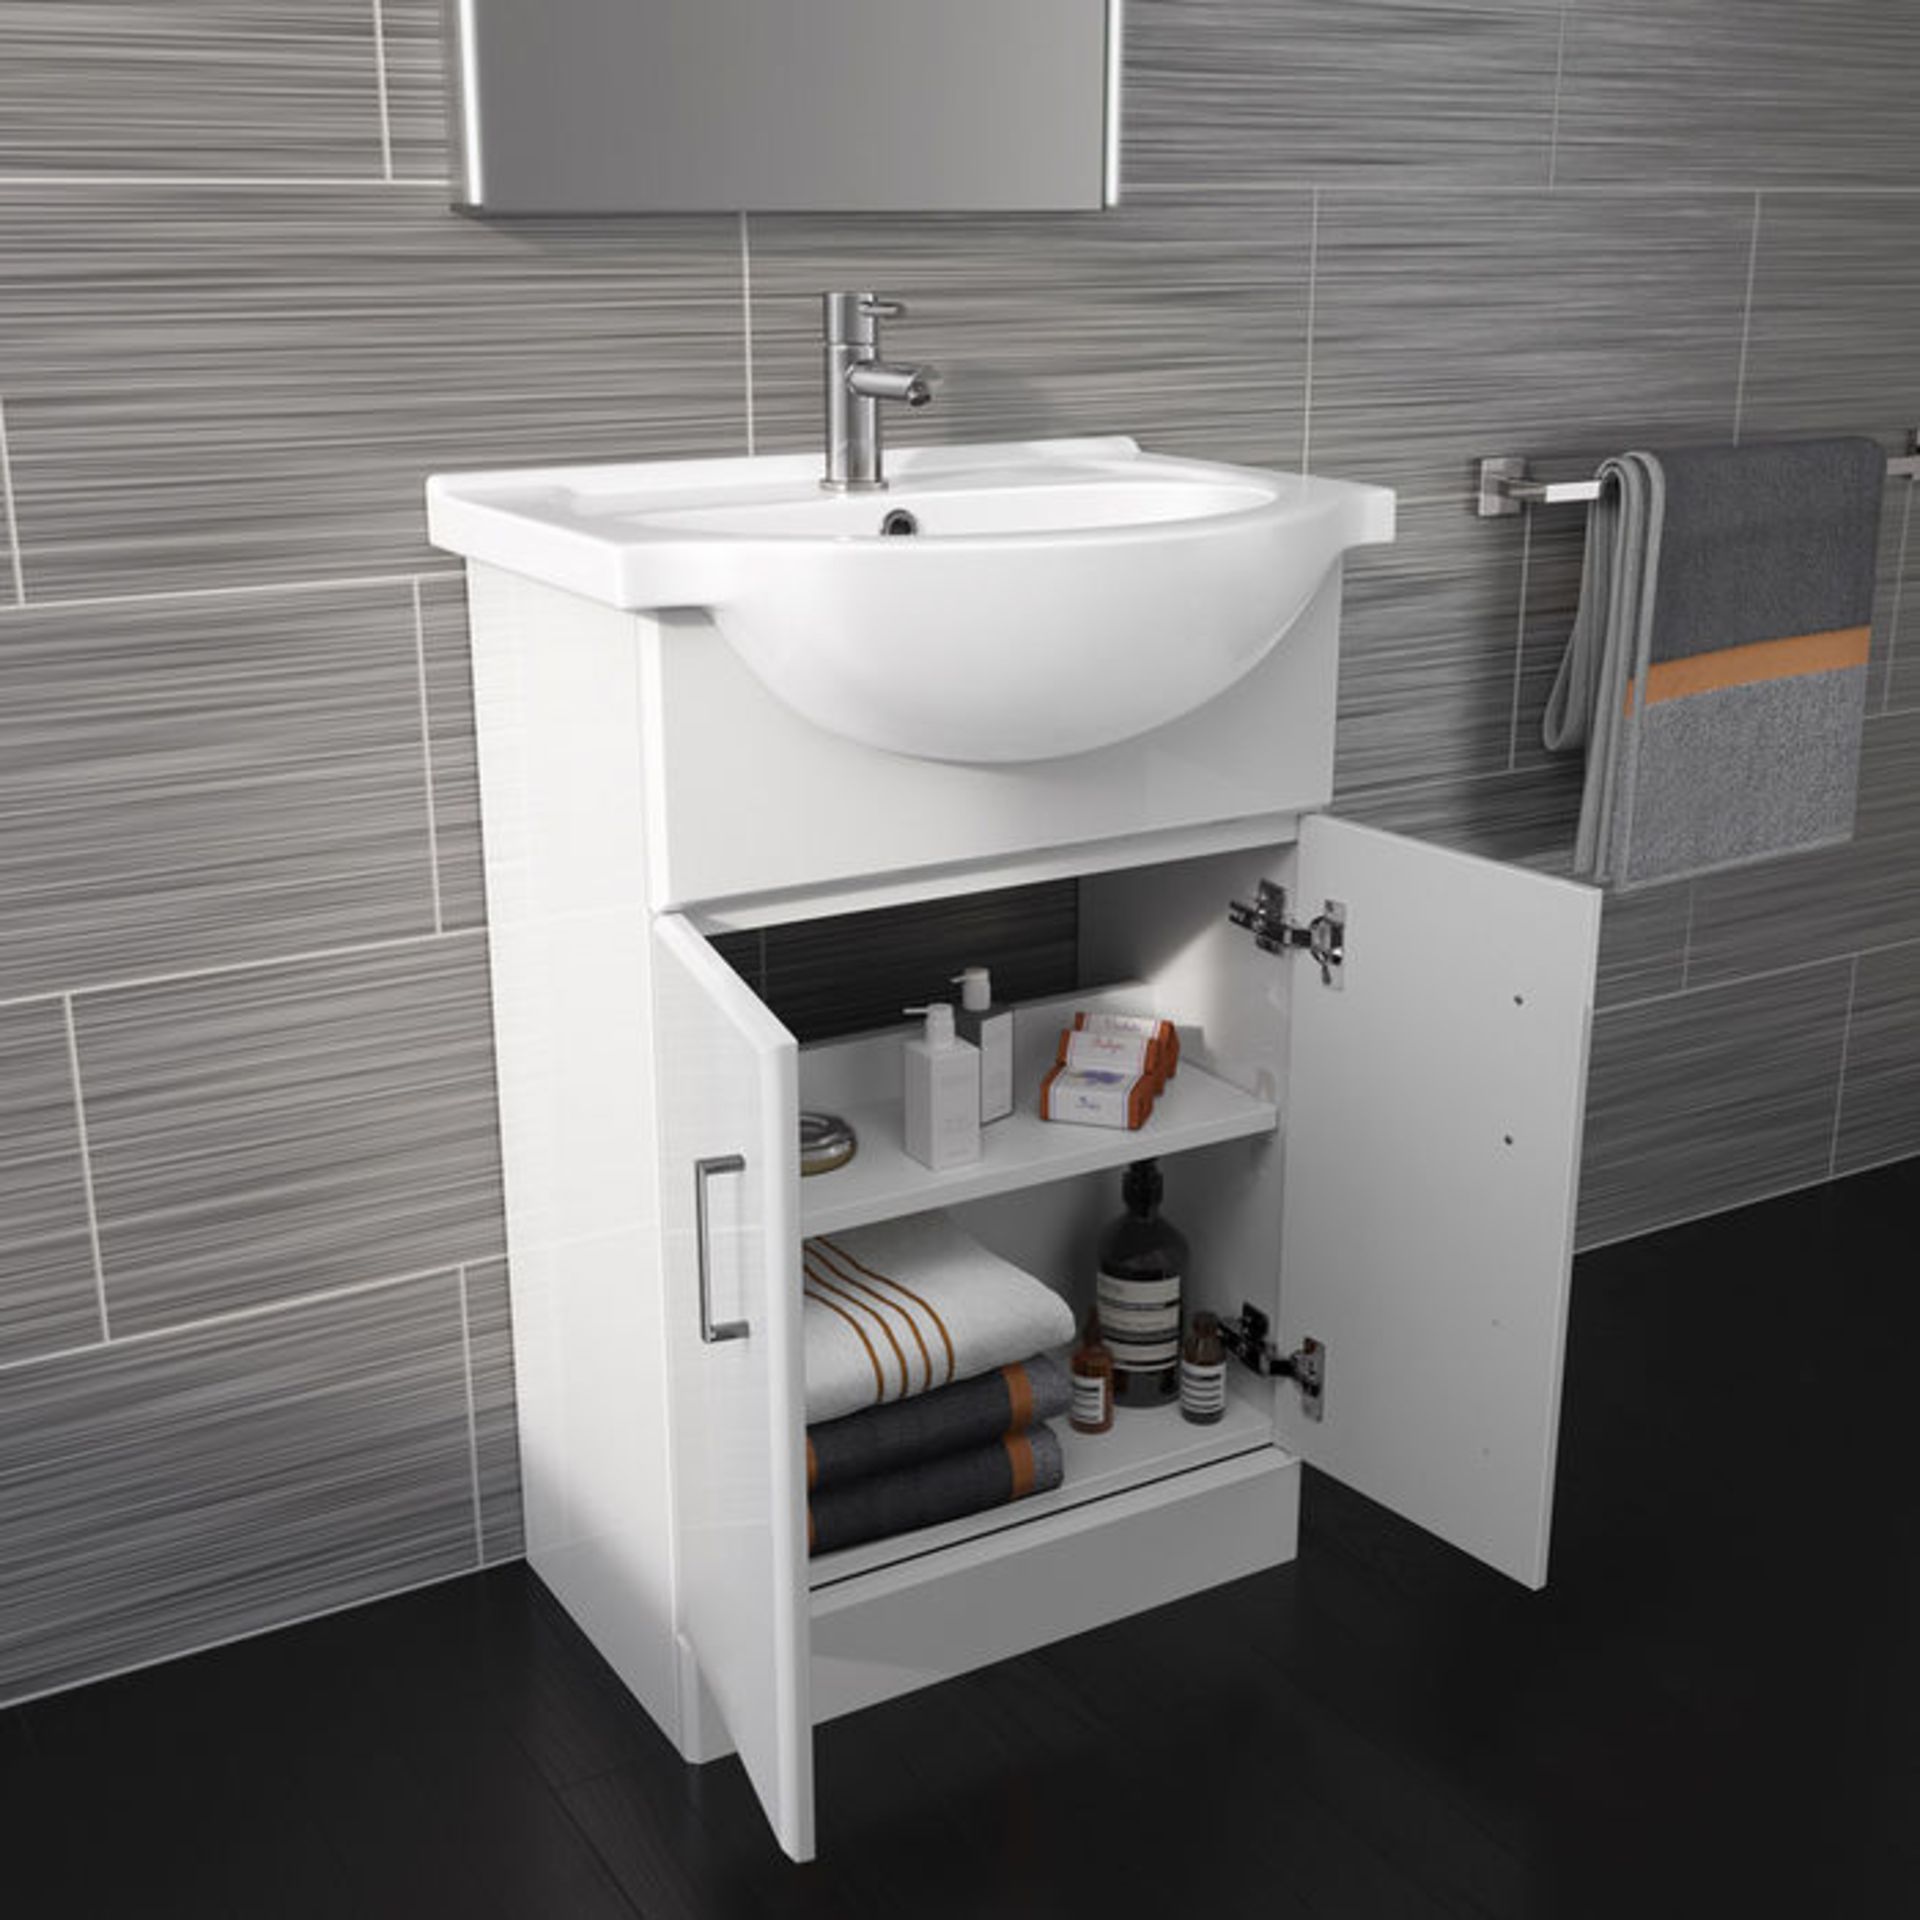 (PA59) 550x300mm Quartz Gloss White Built In Basin Cabinet. Comes complete with basin. Pristine - Image 2 of 4